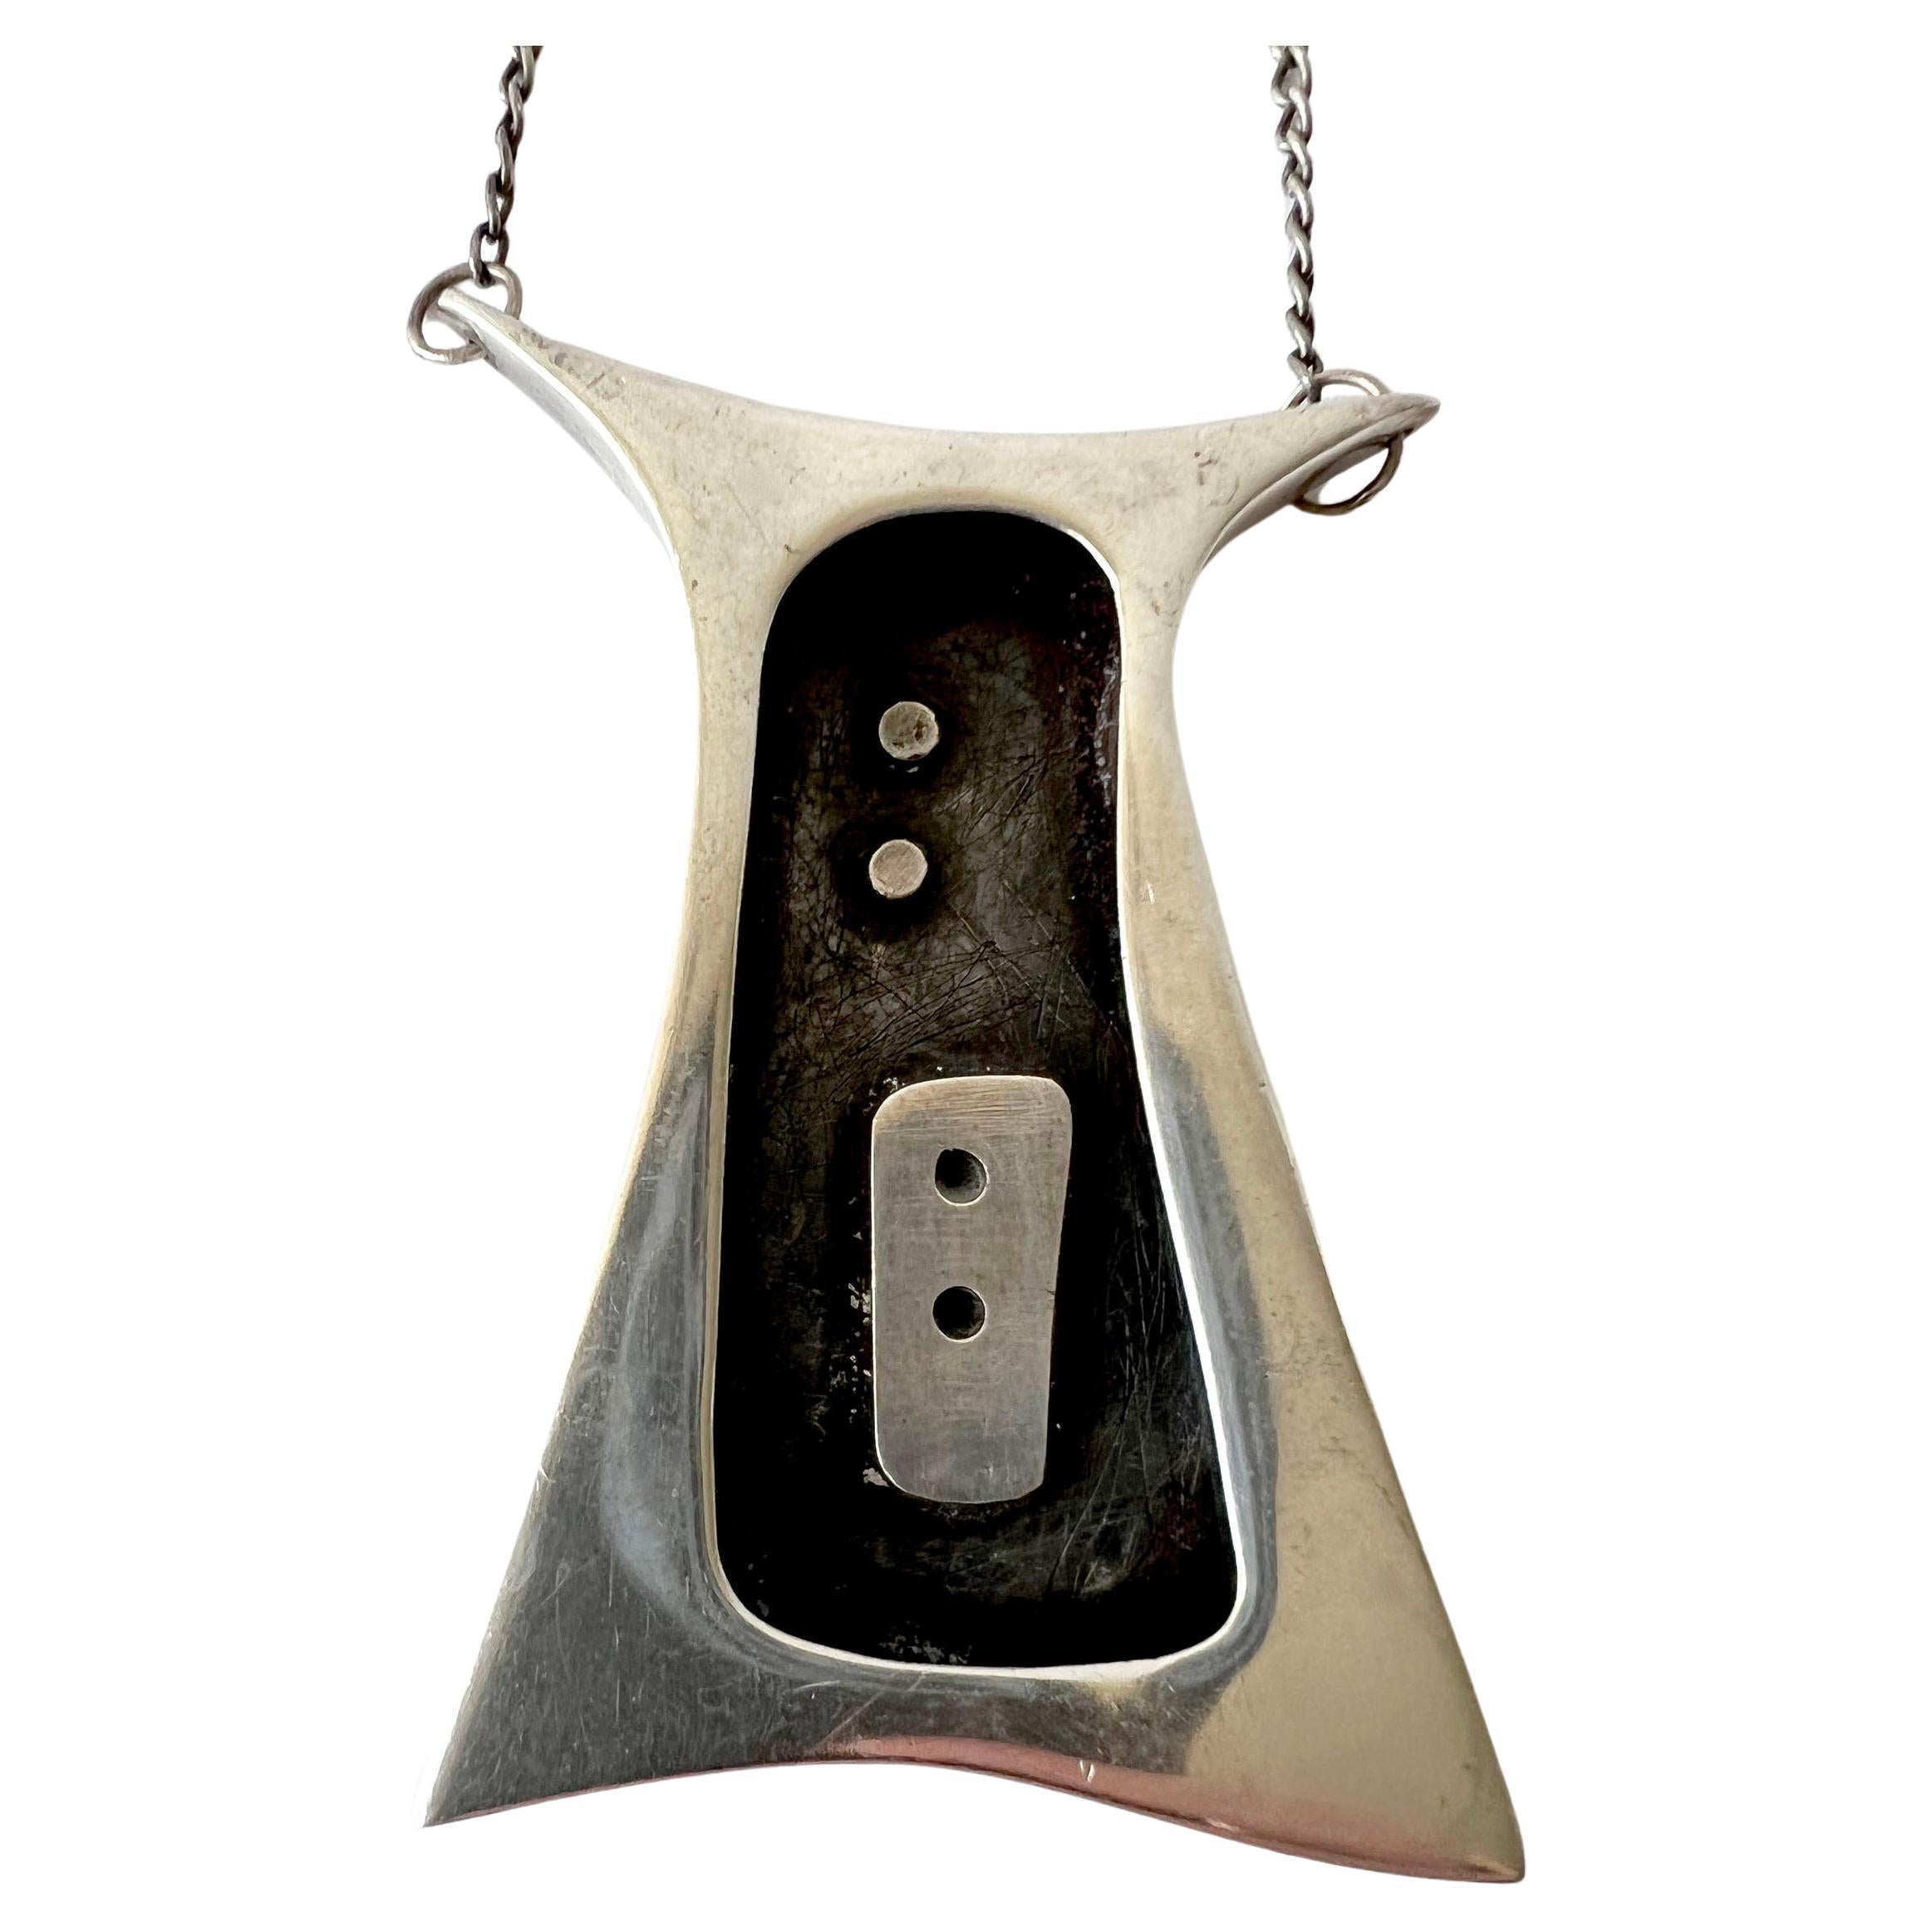 1950s American Modernist Studio Sterling Silver Shadowbox Pendant Necklace